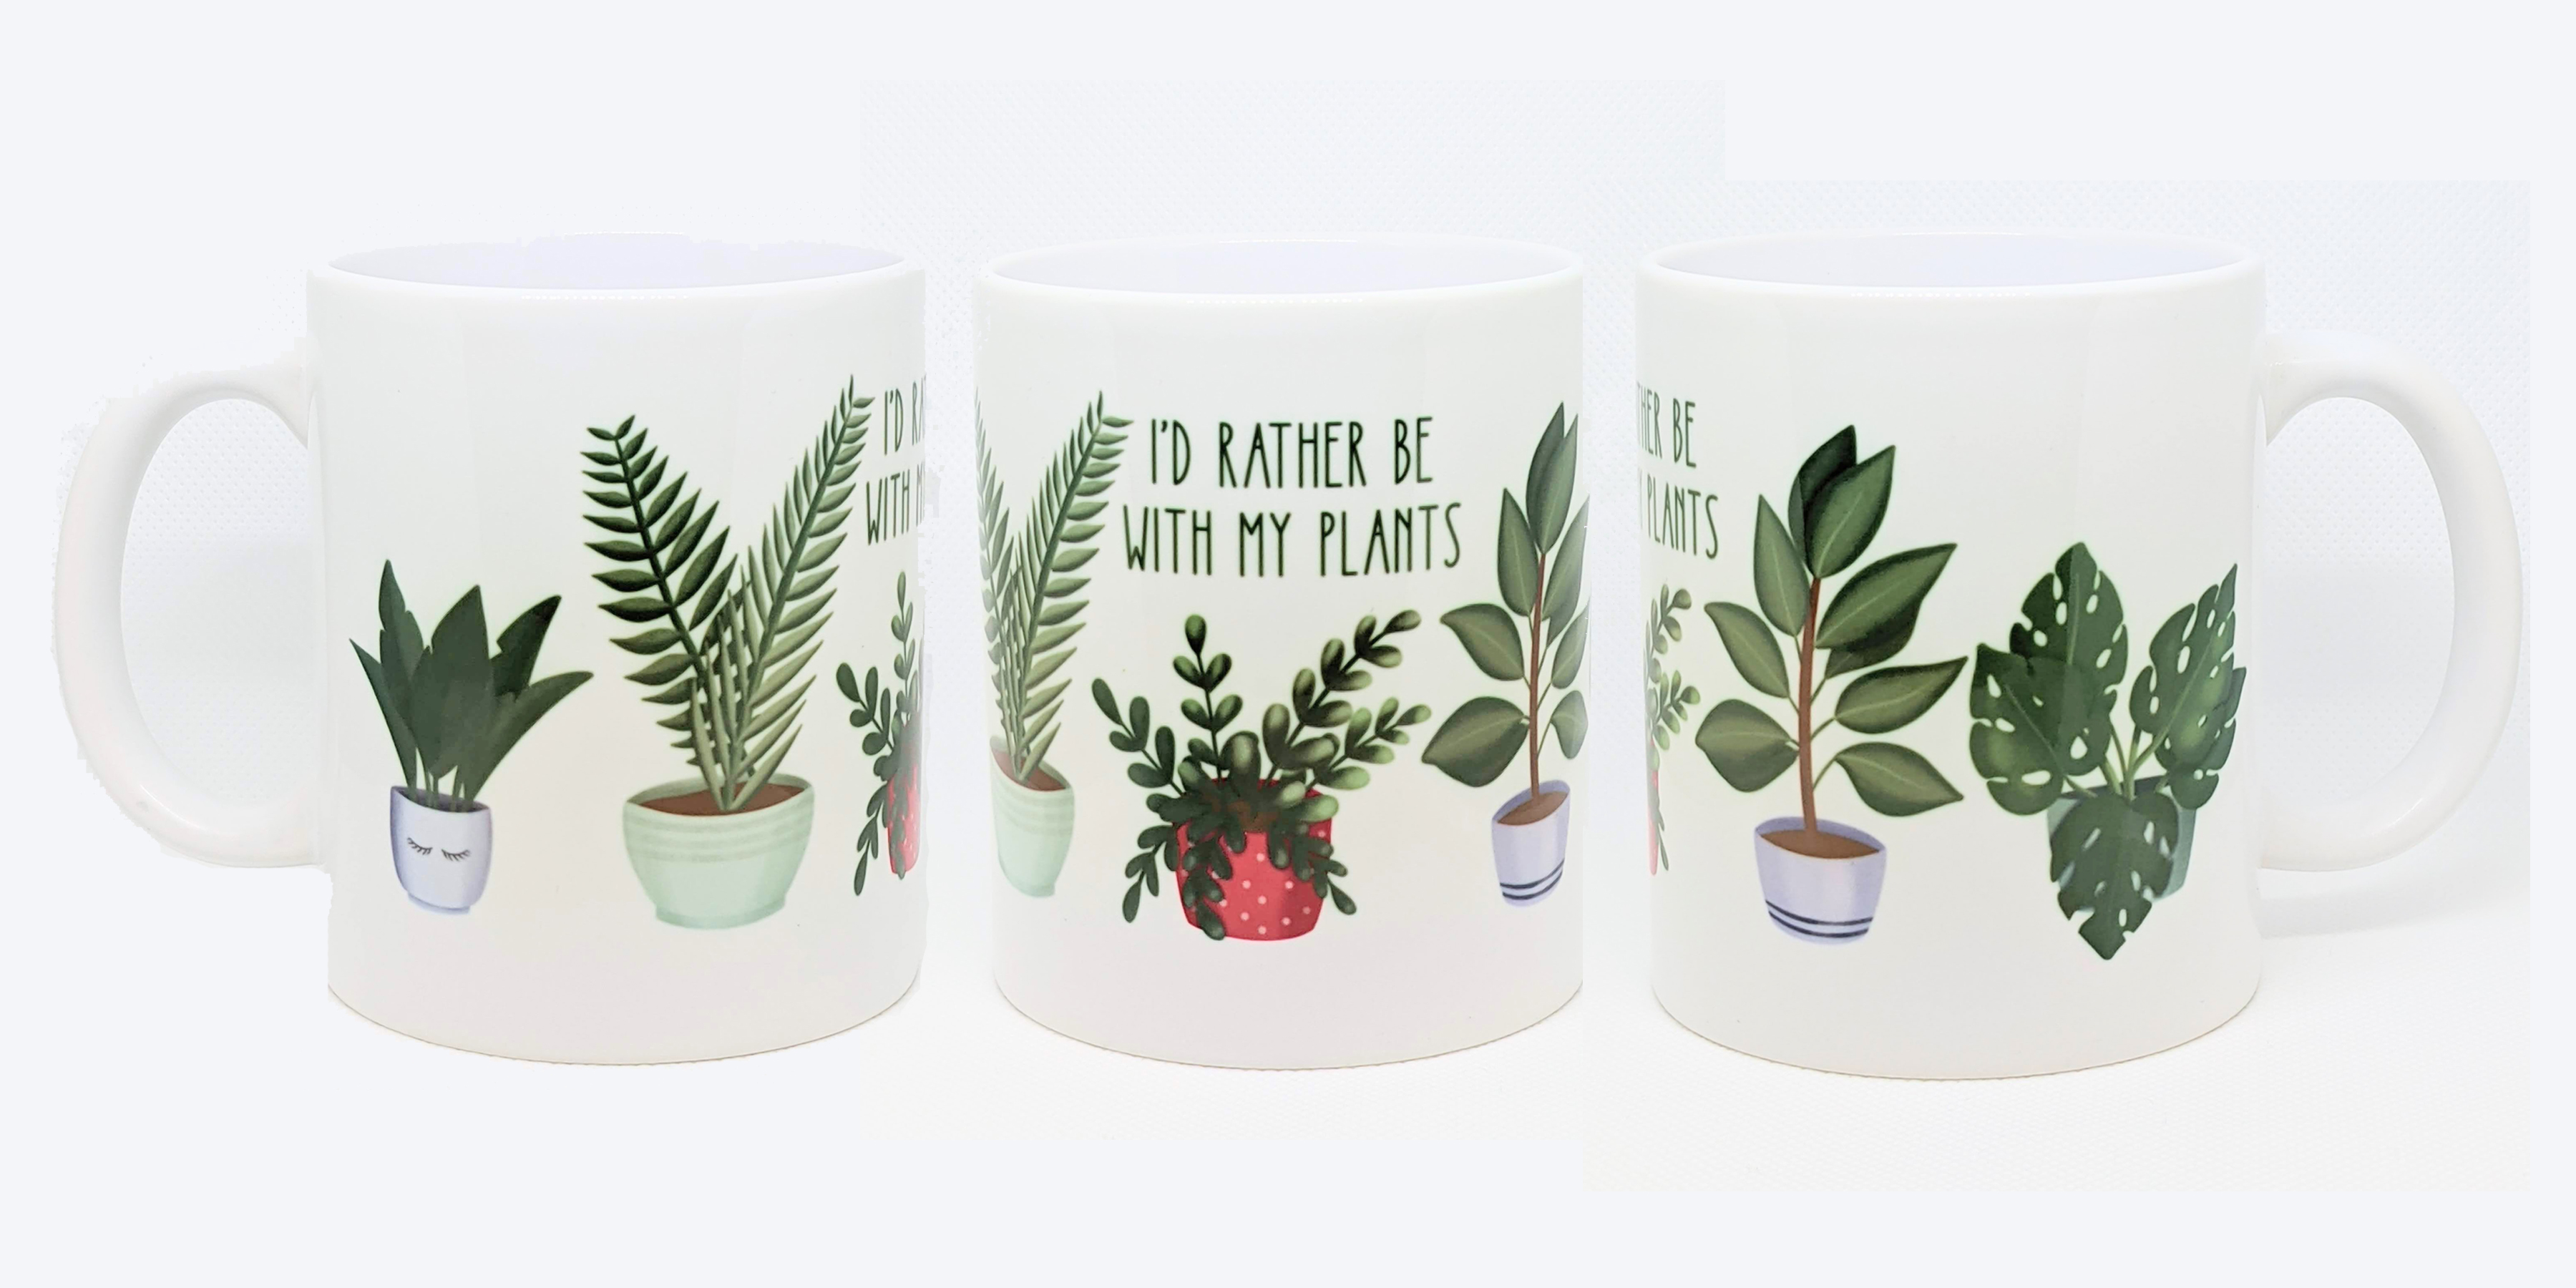 I'd Rather Be With my Palnts made with sublimation printing